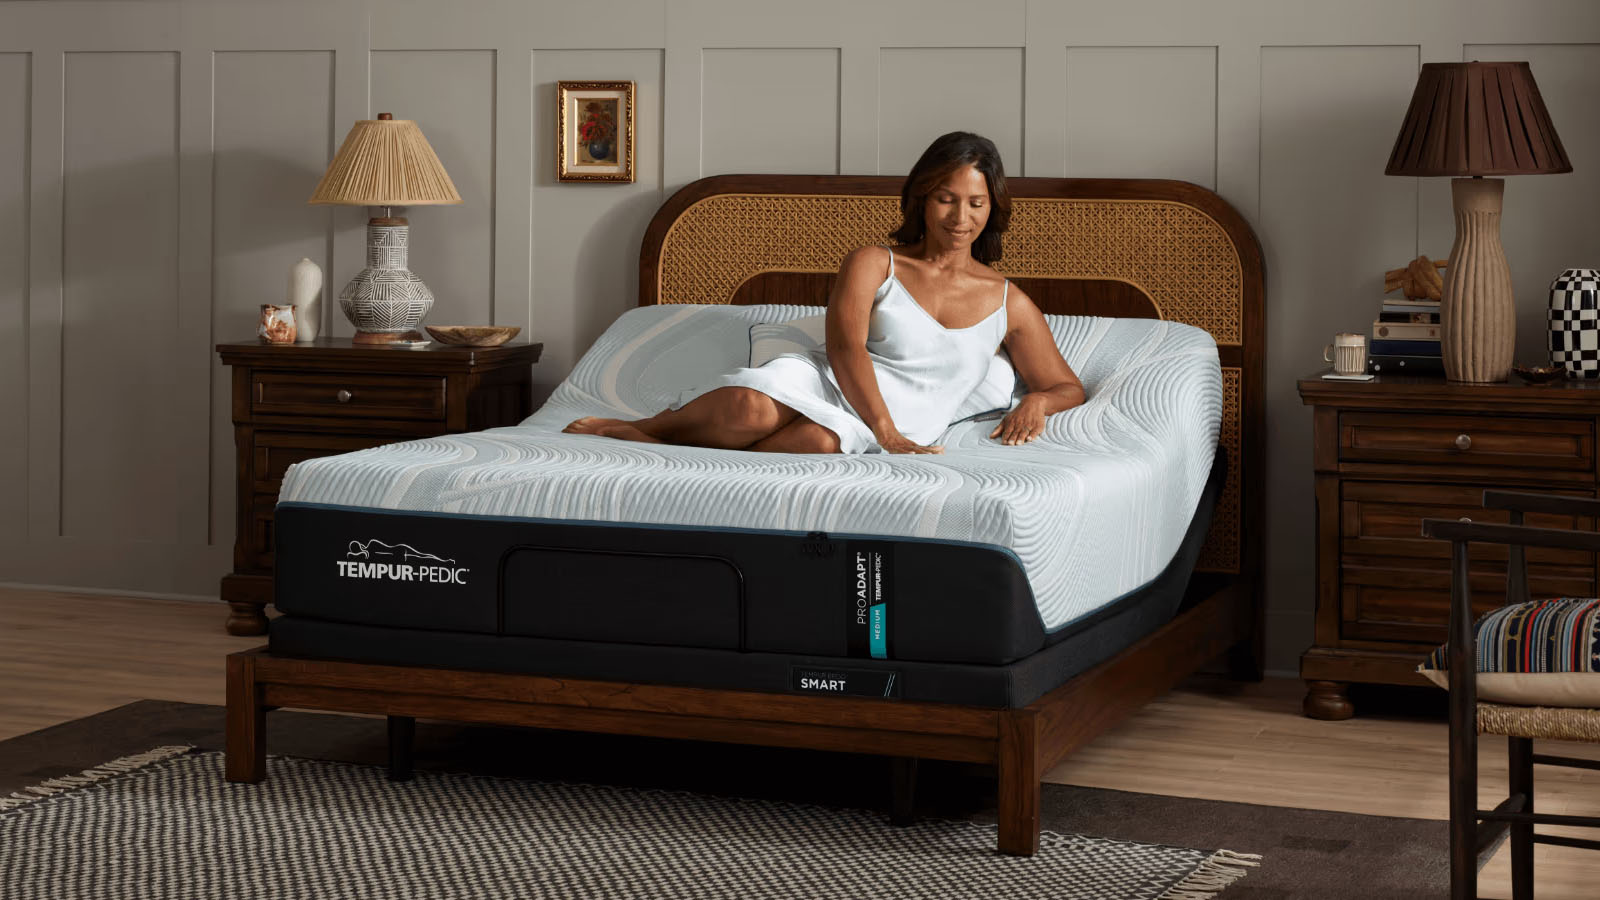 The Tempur-Pedic Tempur-ProAdapt mattress in a bedroom, a woman is sitting on top of the bed